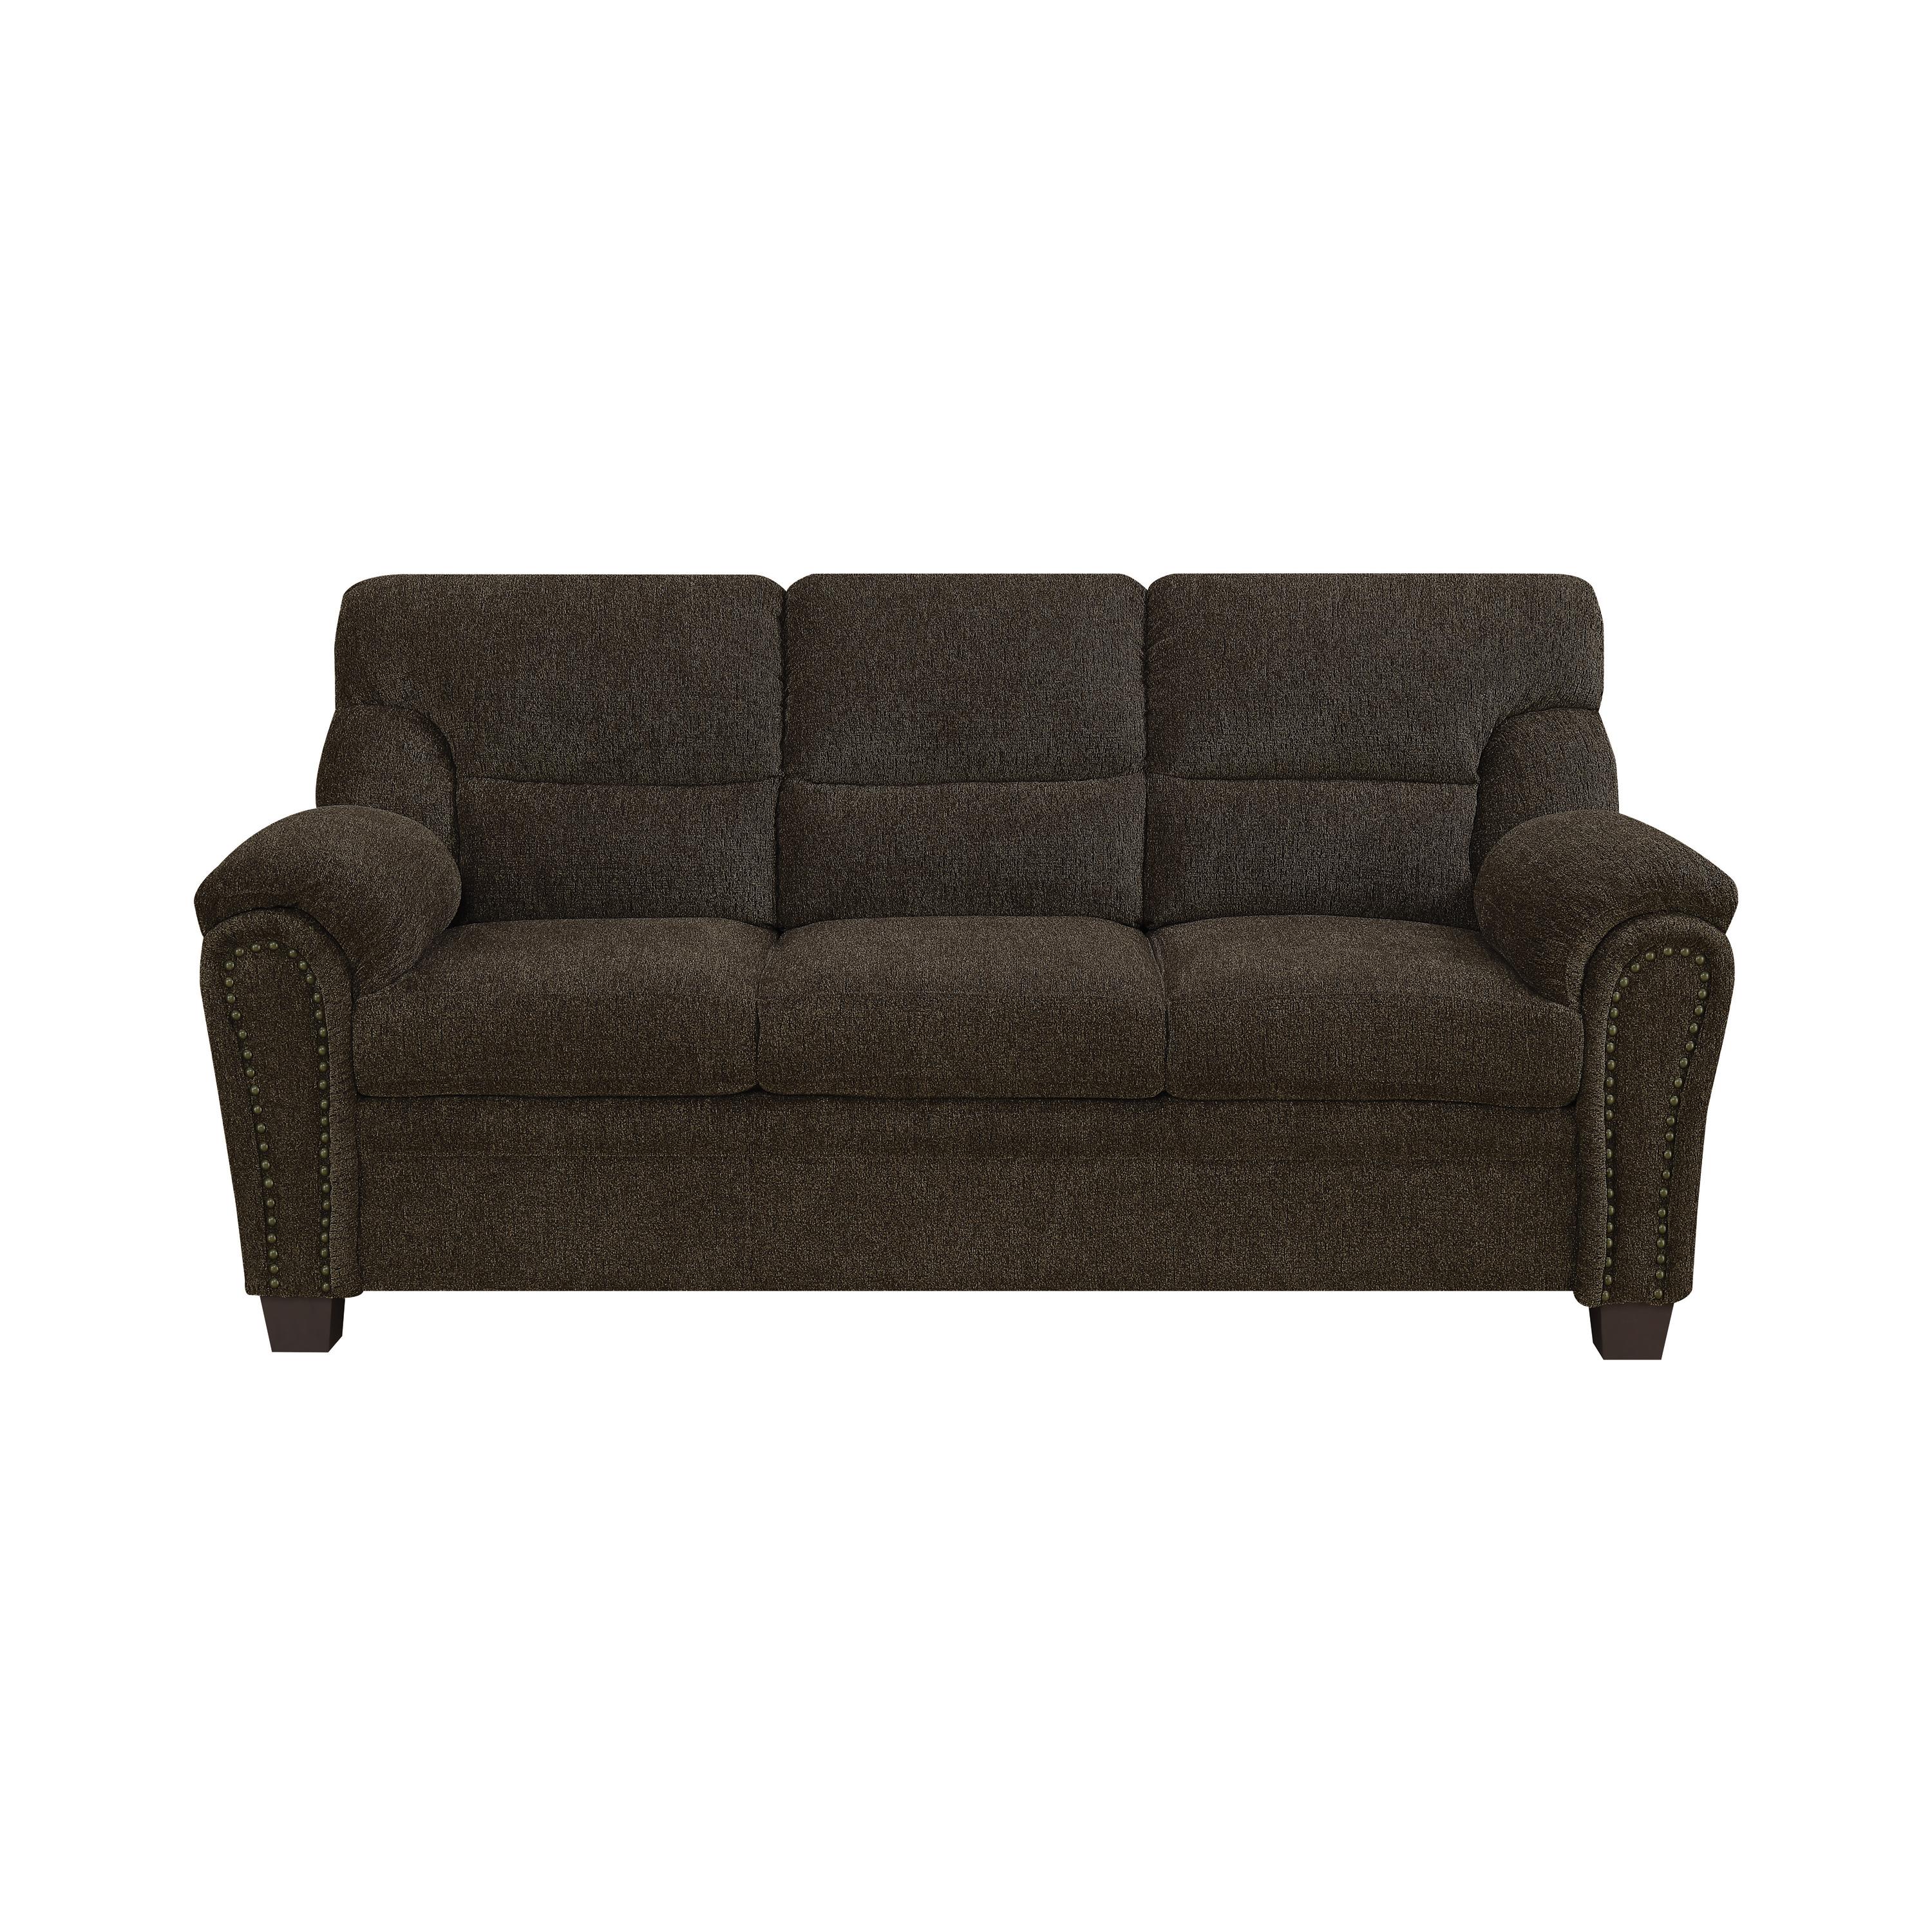 Transitional Sofa 506571 Clemintine 506571 in Brown Chenille